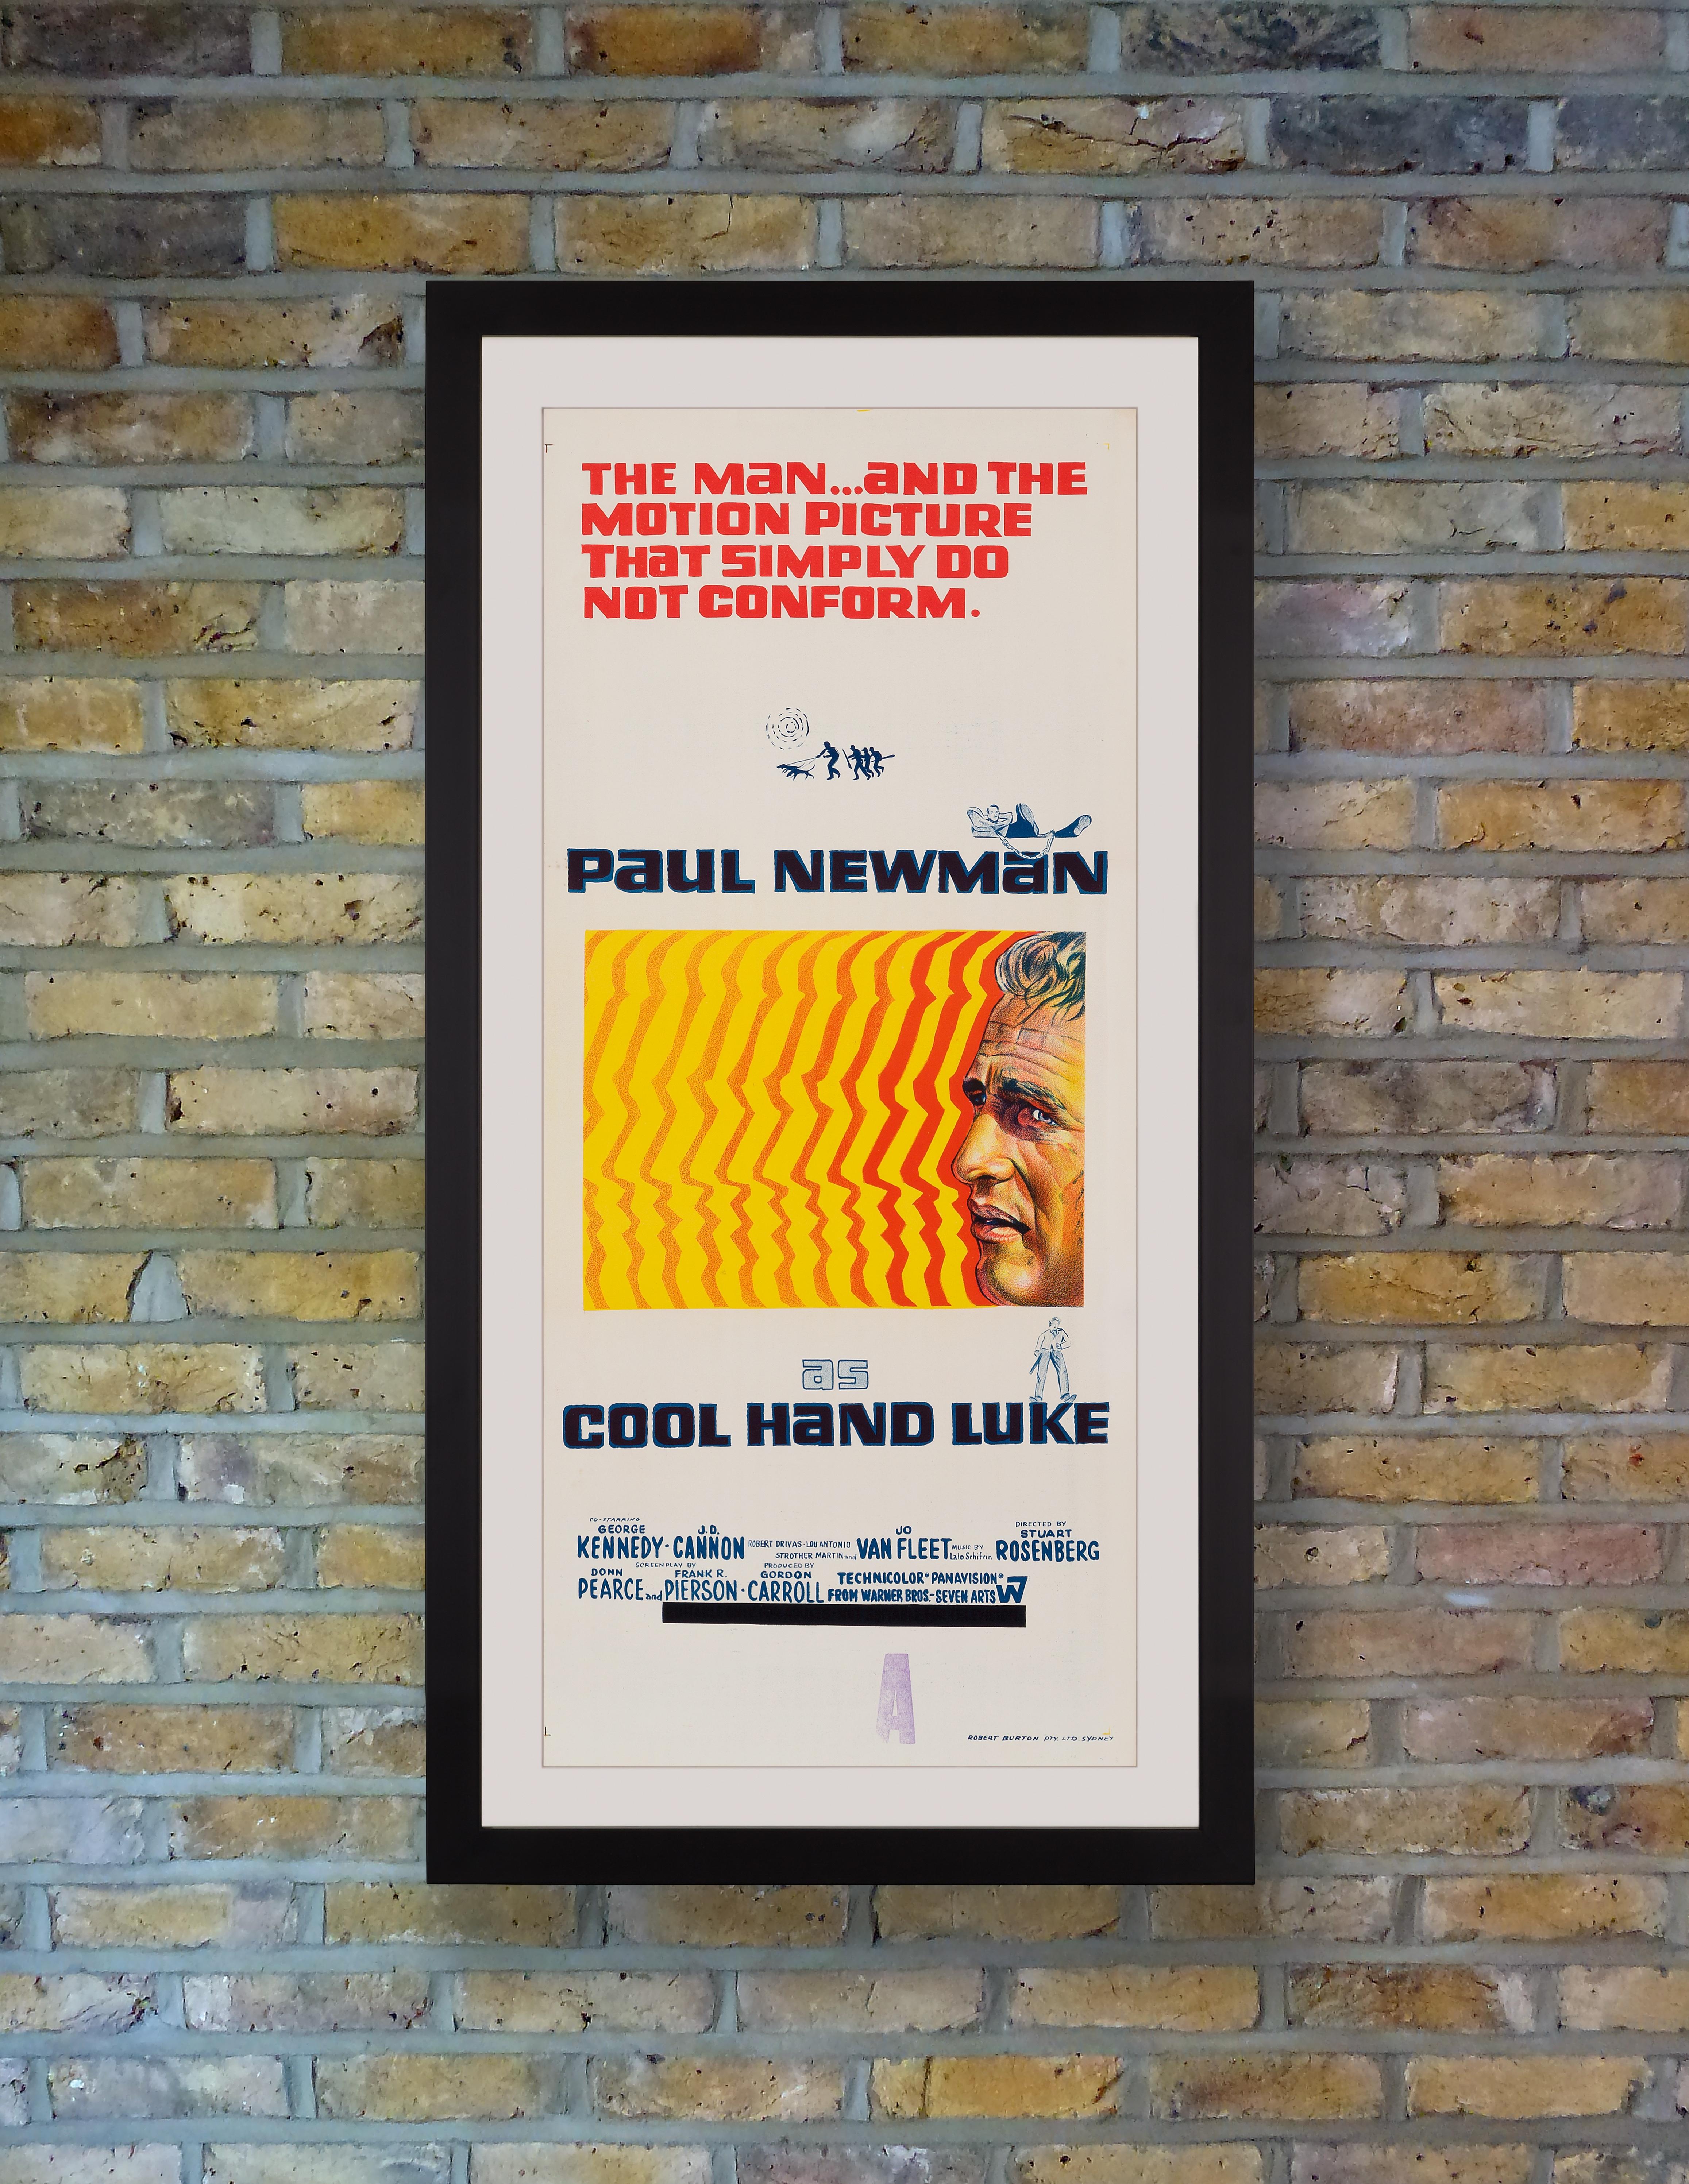 An uber cool Australian Daybill for the 1967 American prison drama 'Cool Hand Luke' starring Paul Newman in an Oscar nominated performance as the titular anti-hero, a free spirited prisoner who refuses to conform to the system, as indicated by the